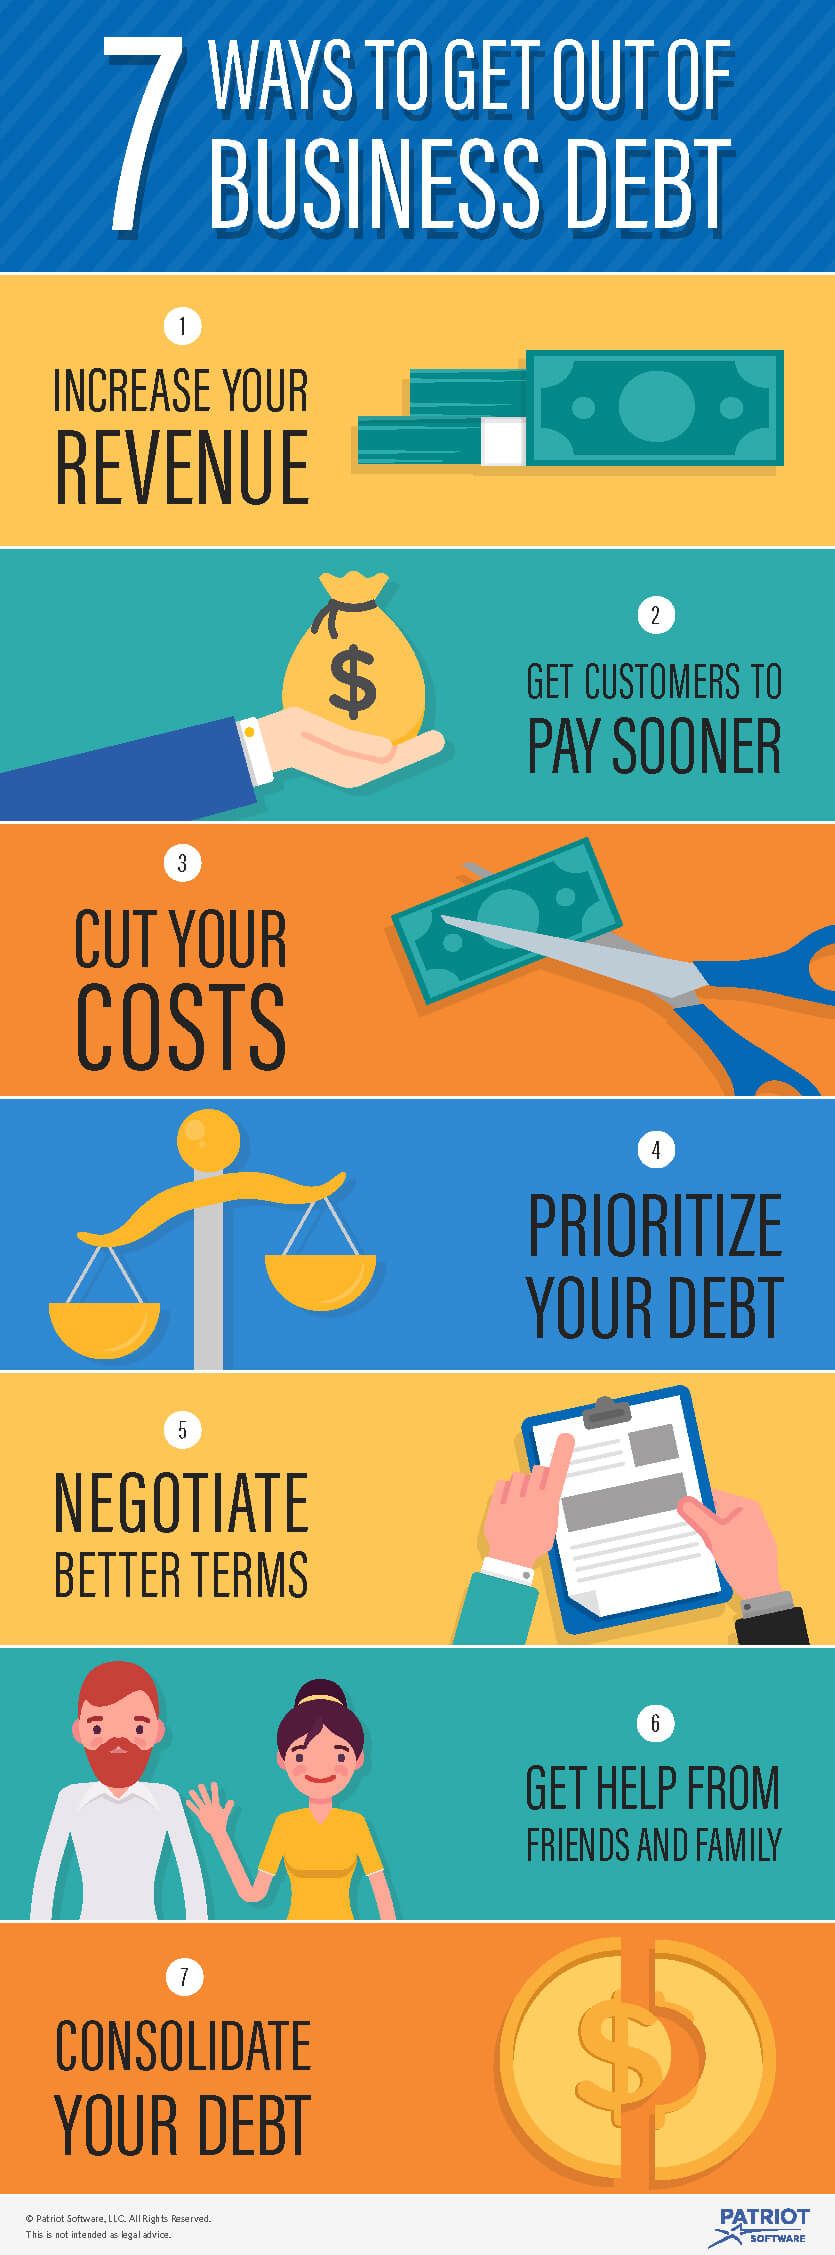 Ways to get out of business debt infographic